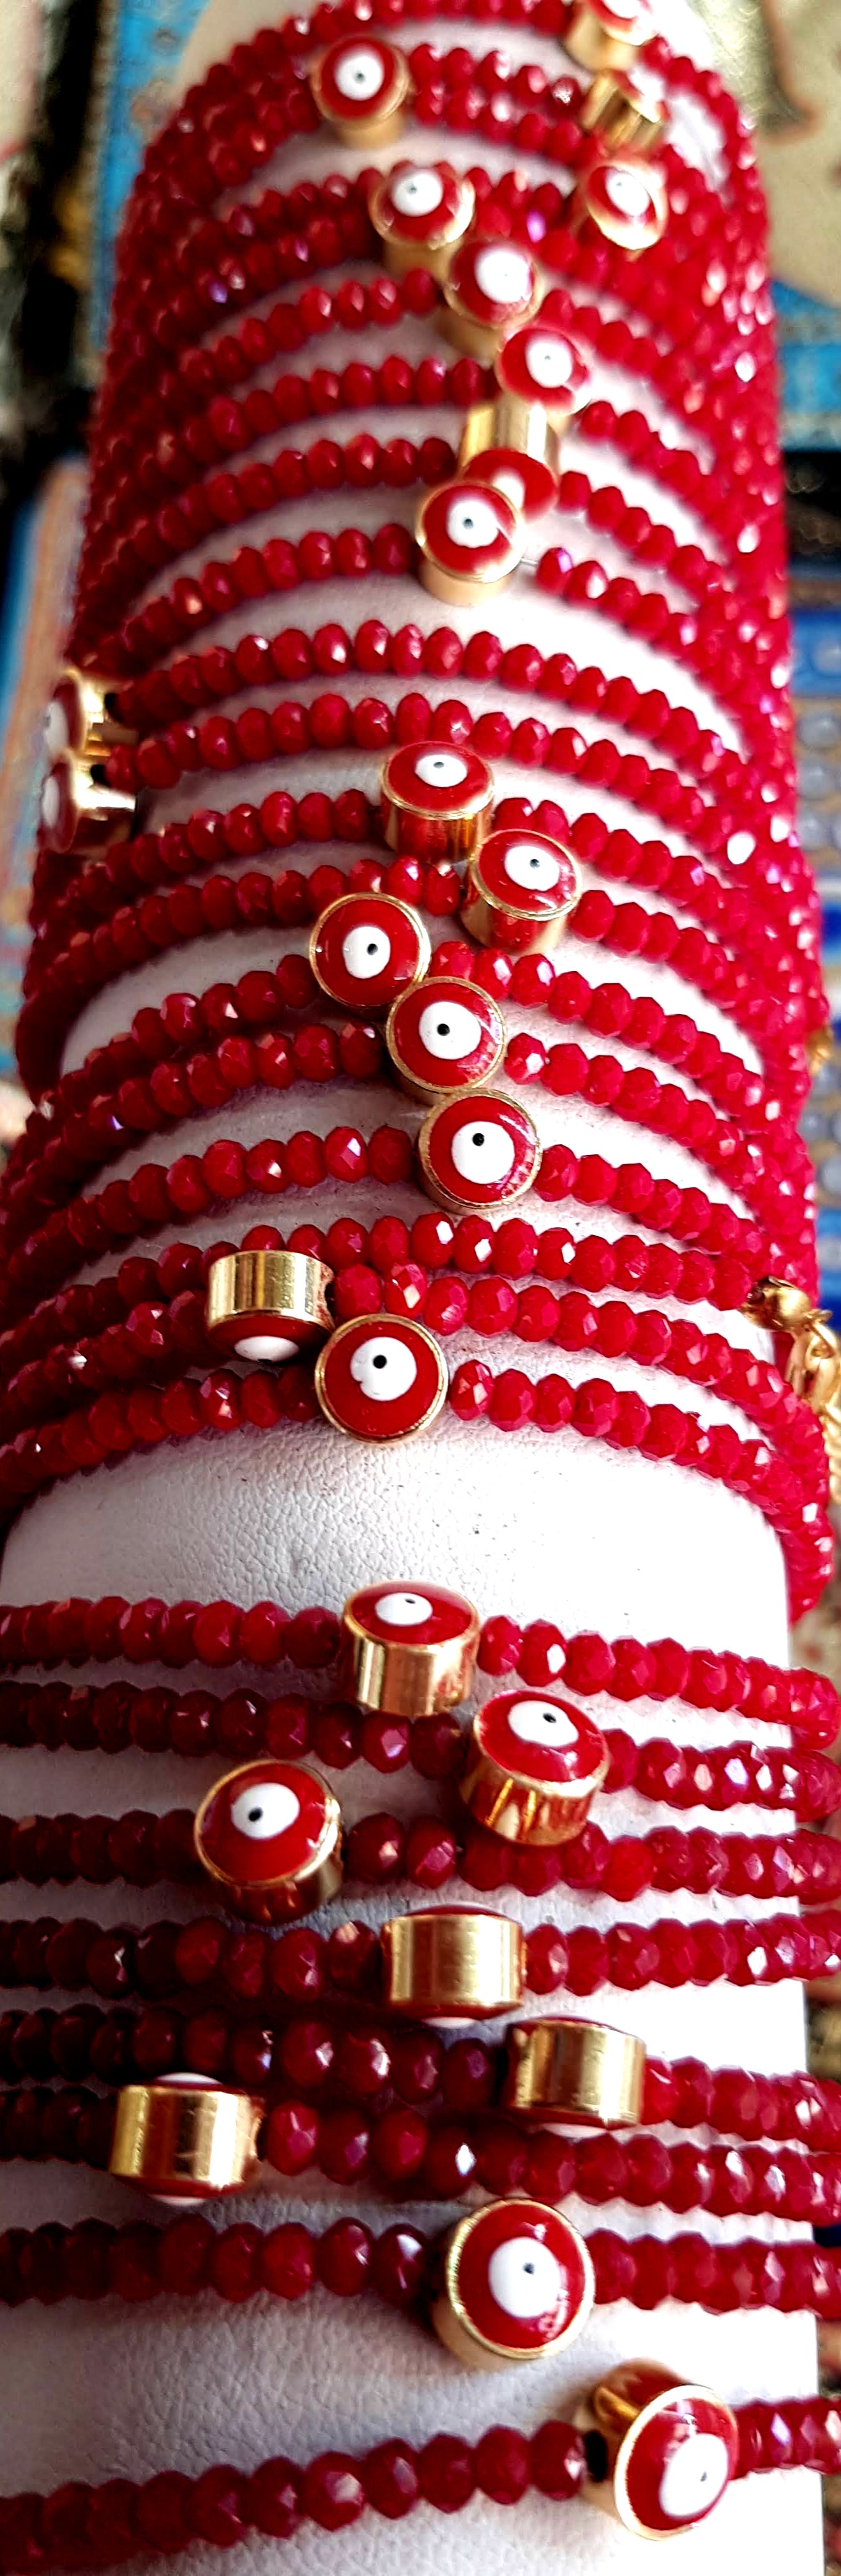 Bluenoemi Jewelry Bracelets red Red and evil eyes Bracelet Red coral crystal stones with Eyes Beads Souvenir for Protection